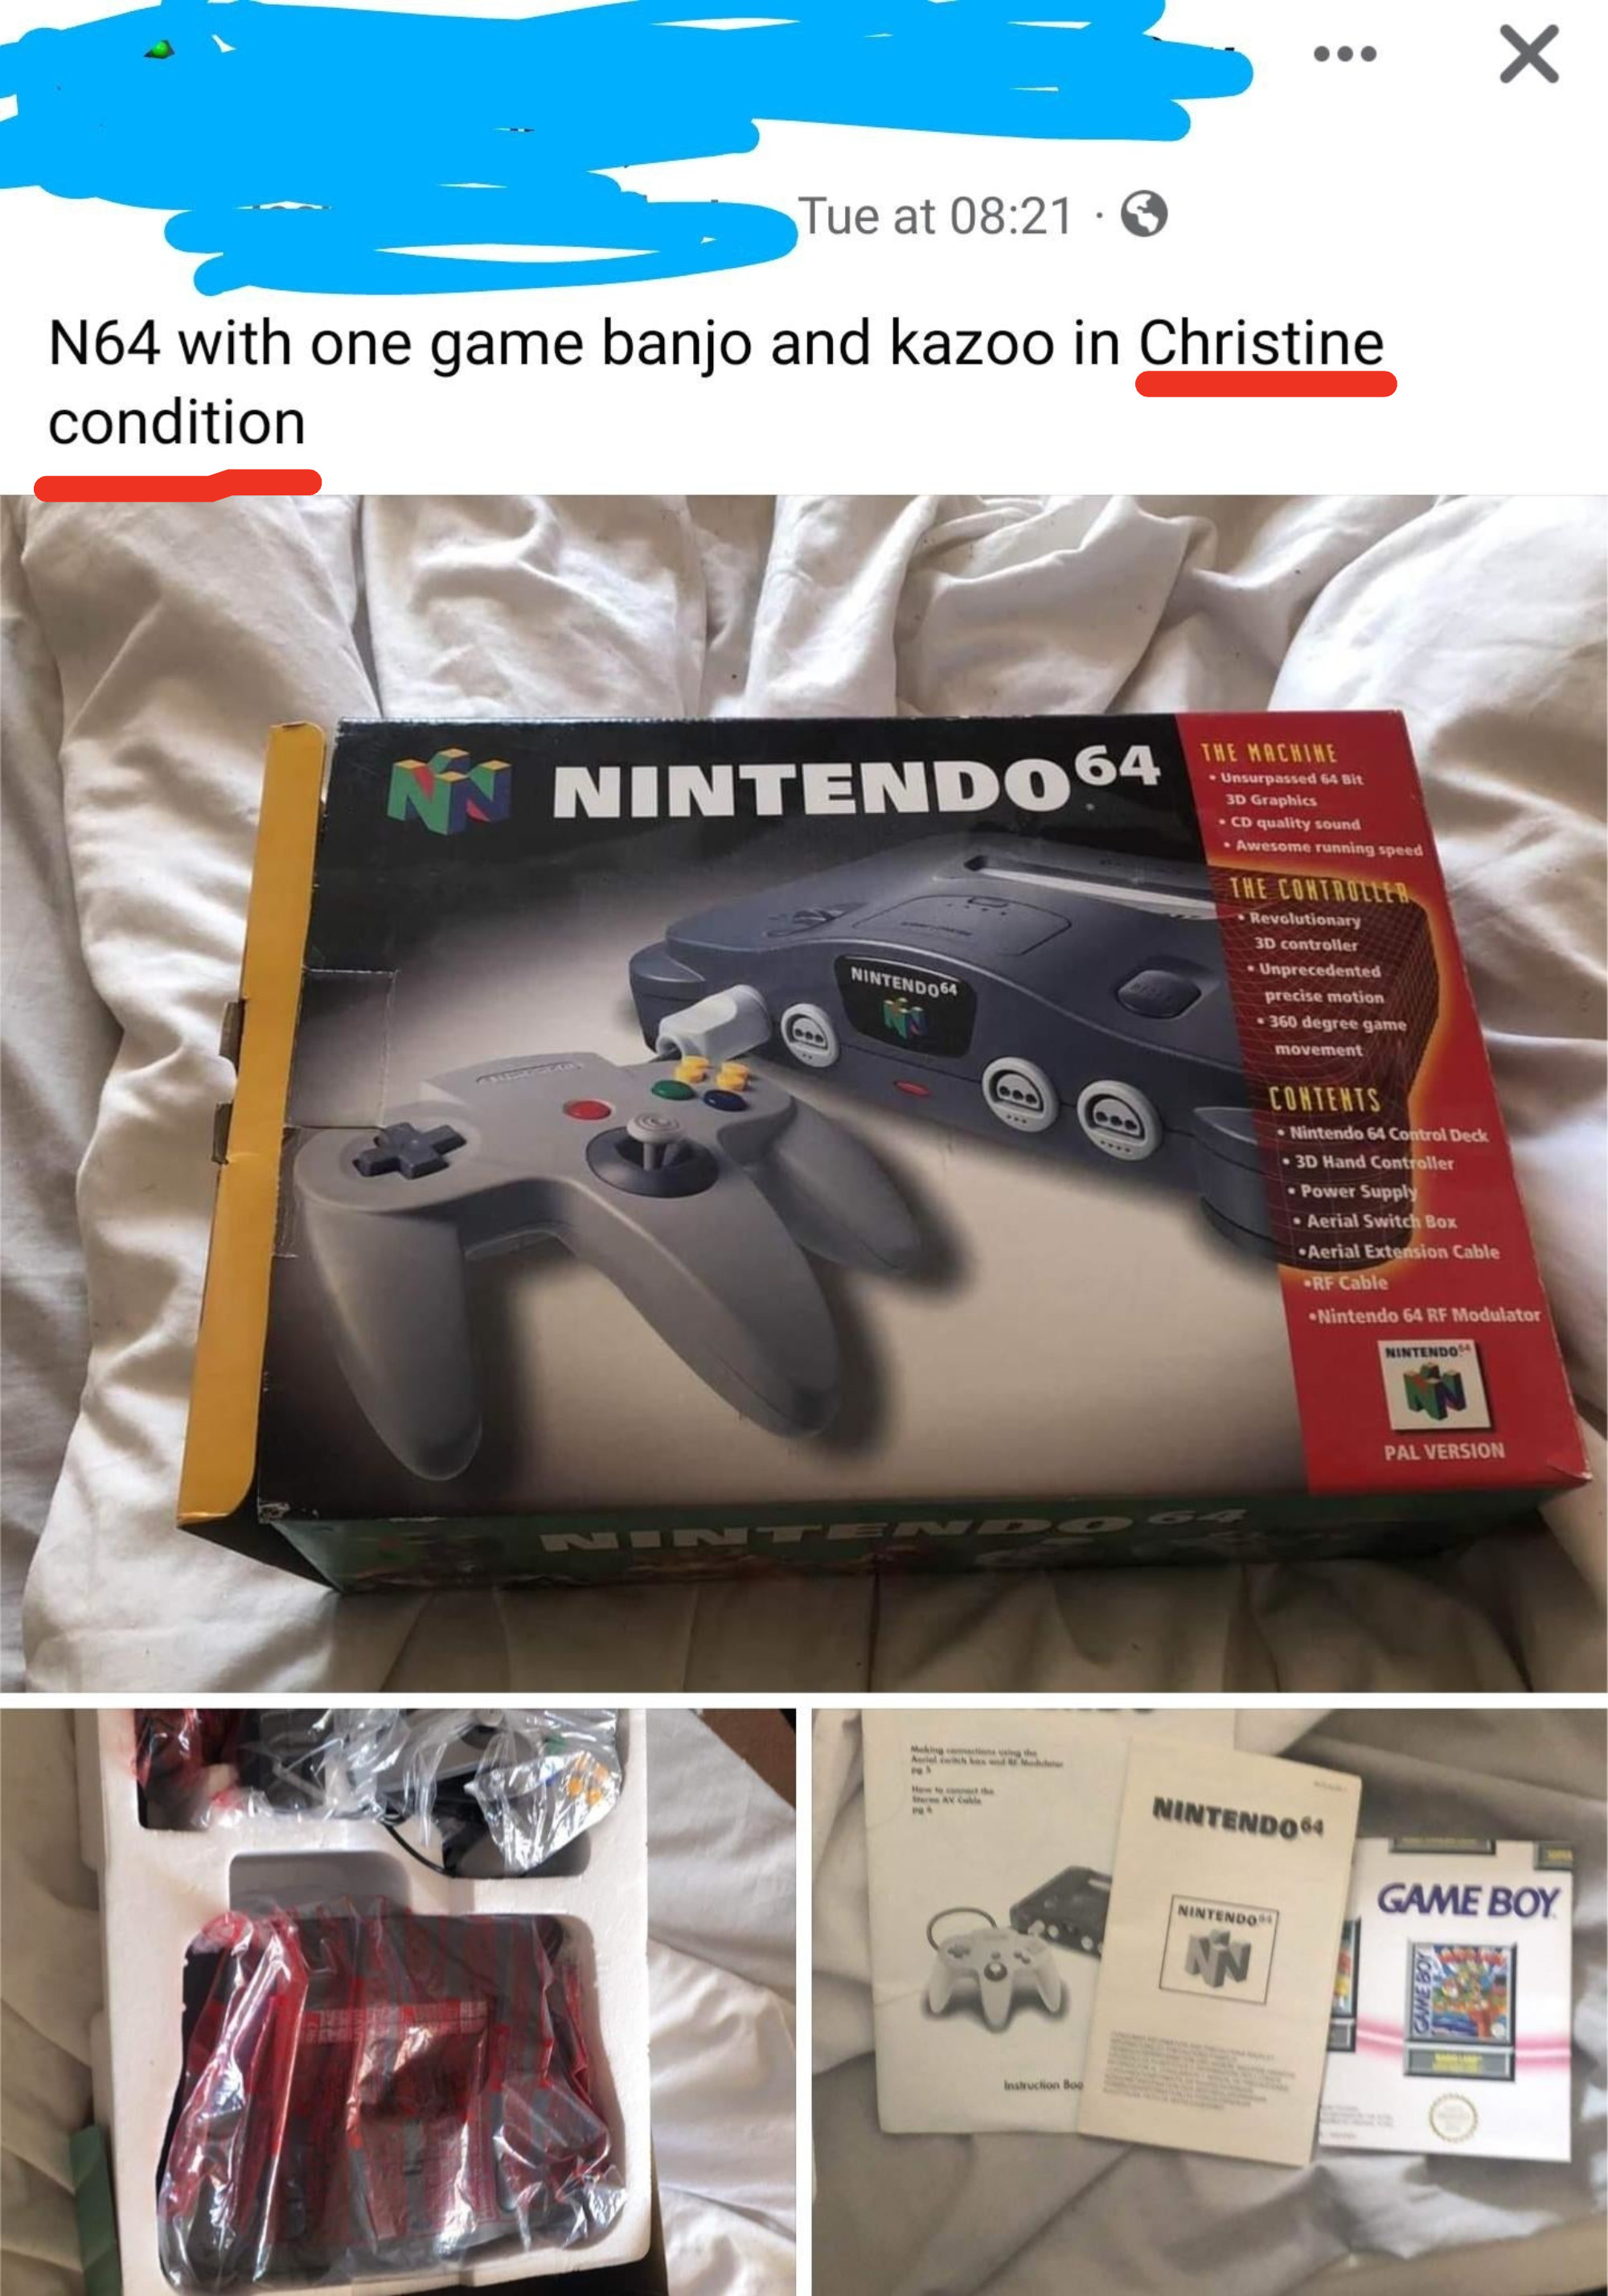 Person advertising a Nintendo product in &quot;Christine&quot; condition instead of pristine